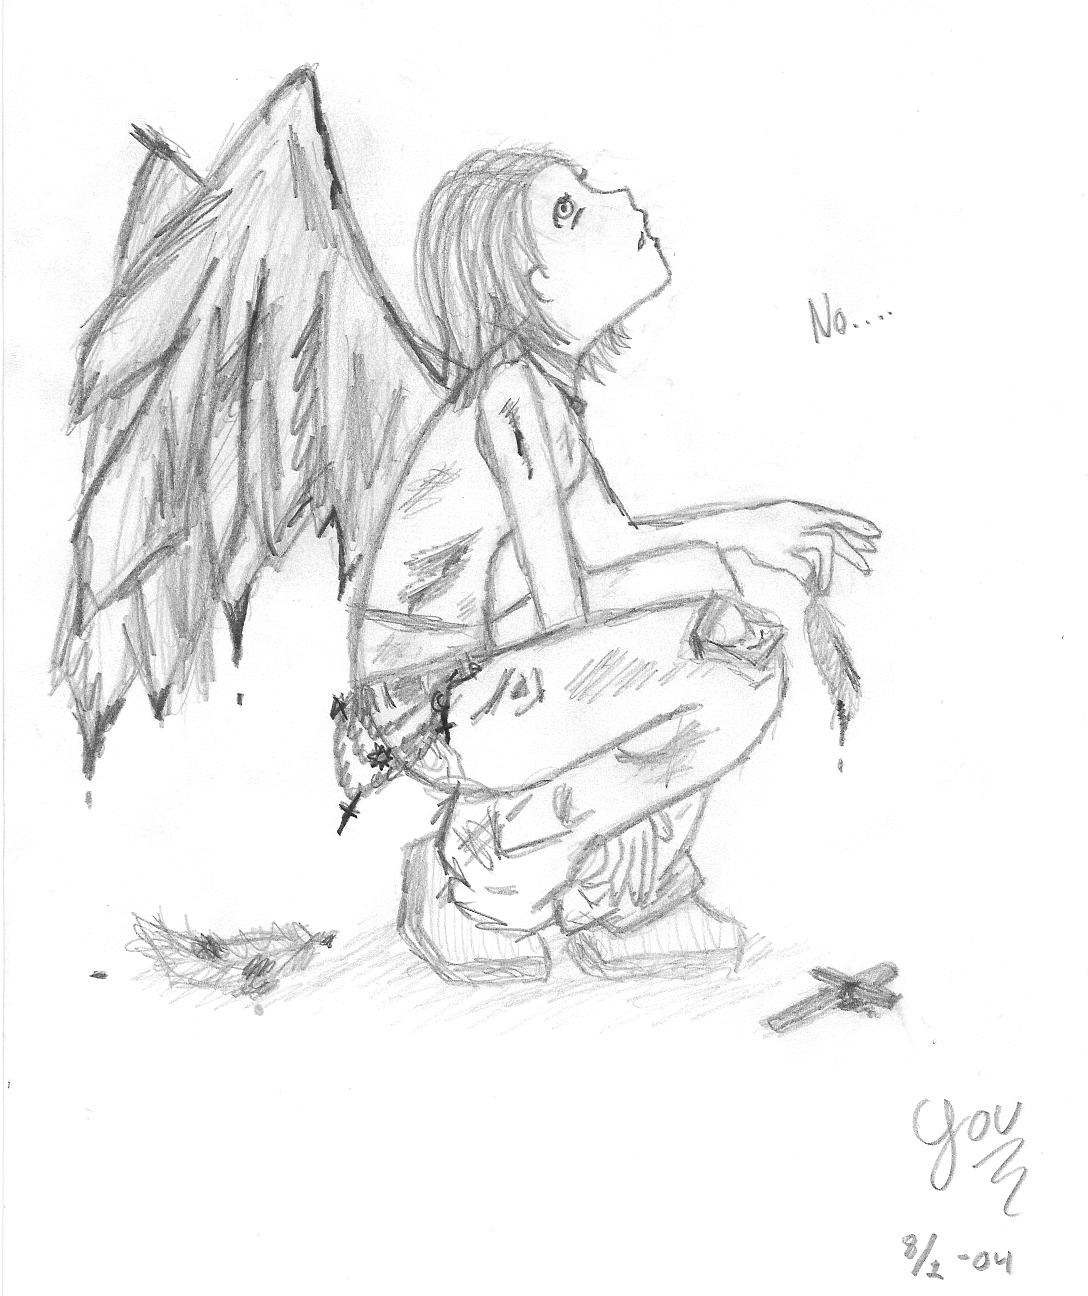 Lost Angel by Lou